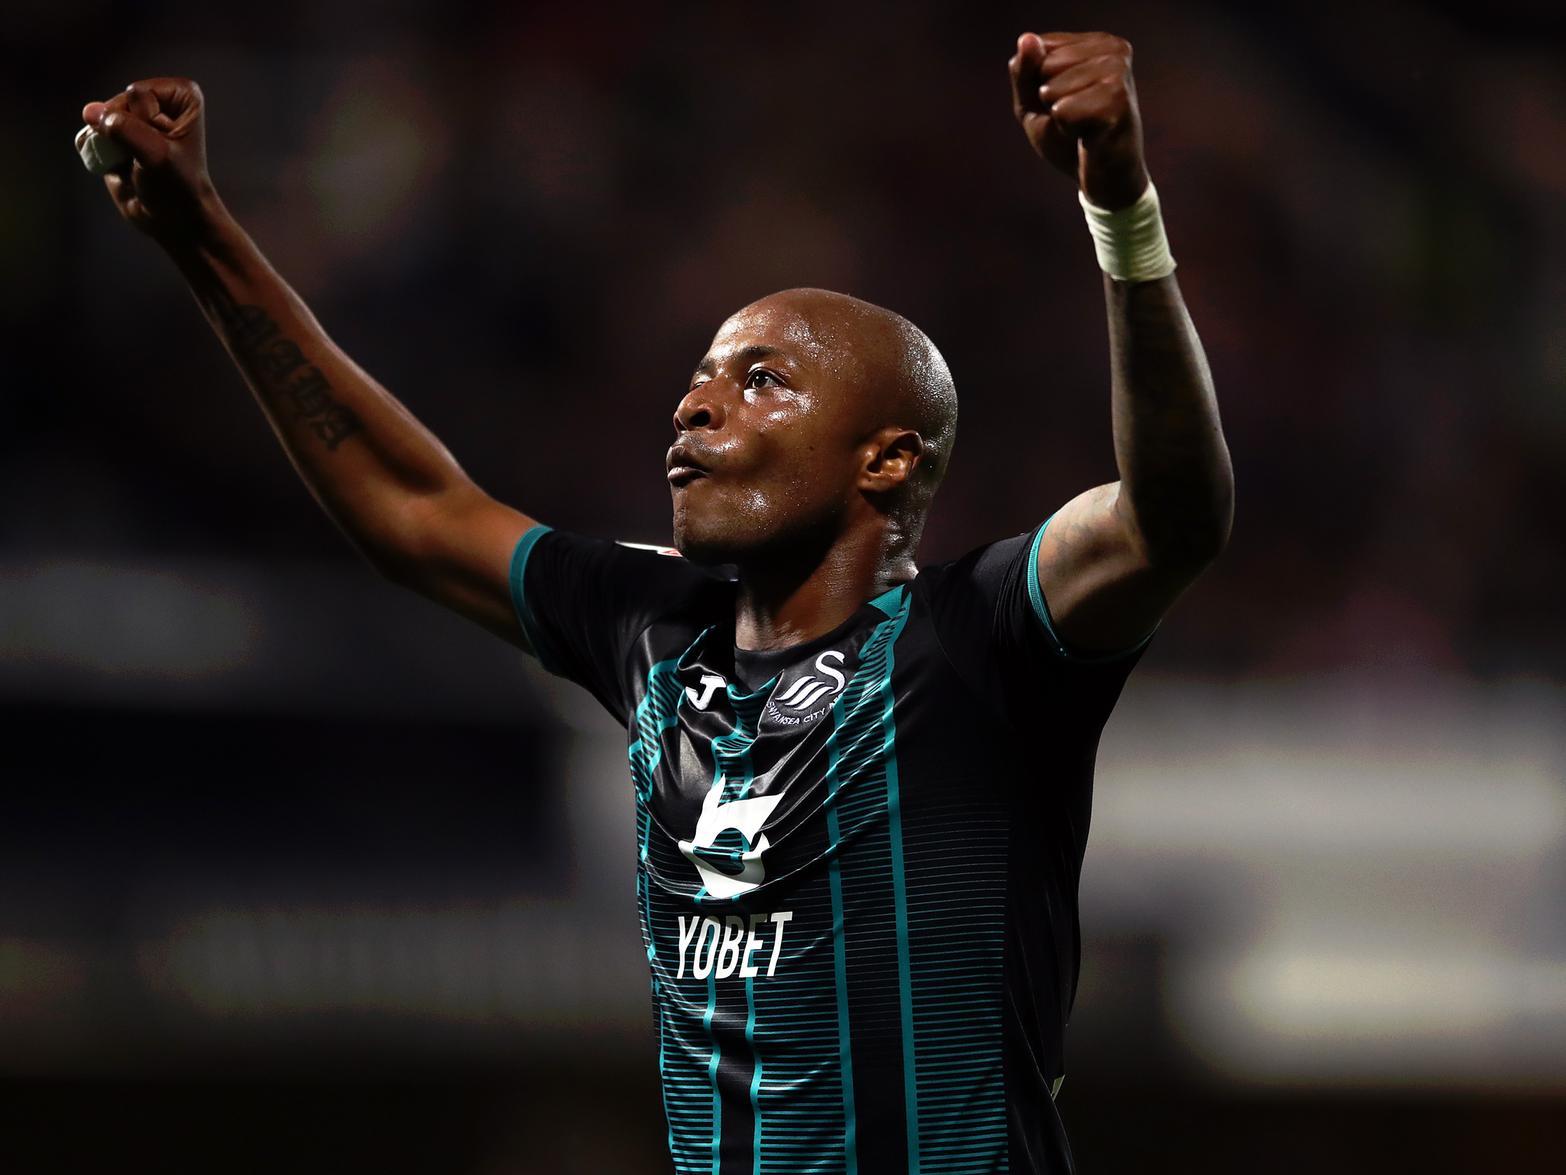 Swansea City striker Andre Ayew has batted away suggestions that he could leave the club in January, instead claiming that he wants to "do something great" with the Welsh side. (BBC Sport)